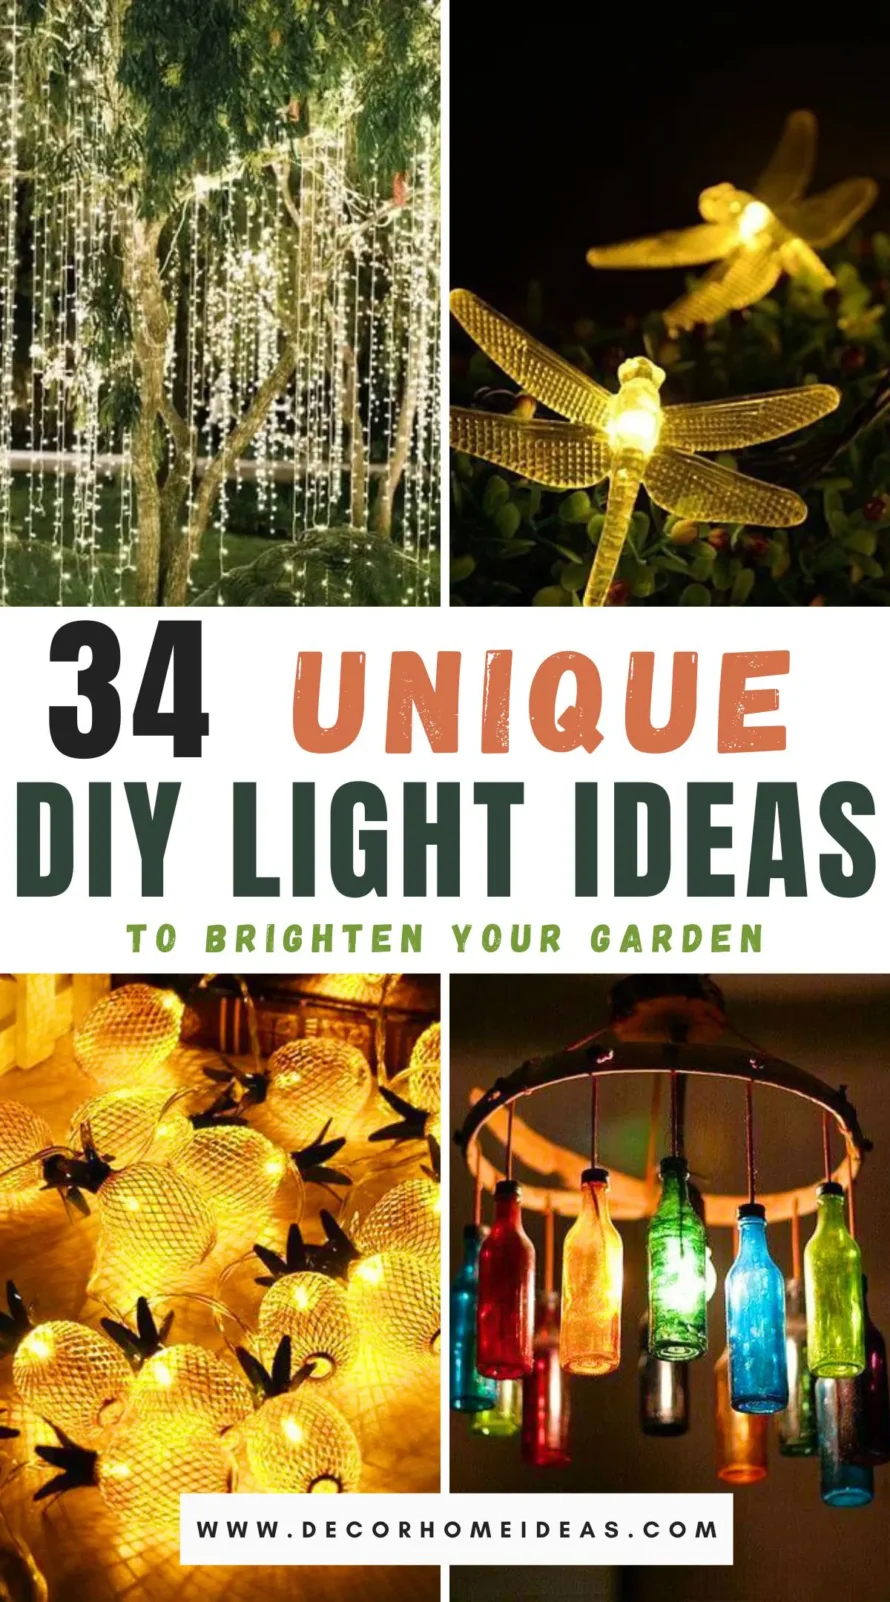 Transform your garden into a magical space with these 34 DIY light ideas. Brighten up your outdoor area with easy-to-make decorations and create a unique atmosphere.